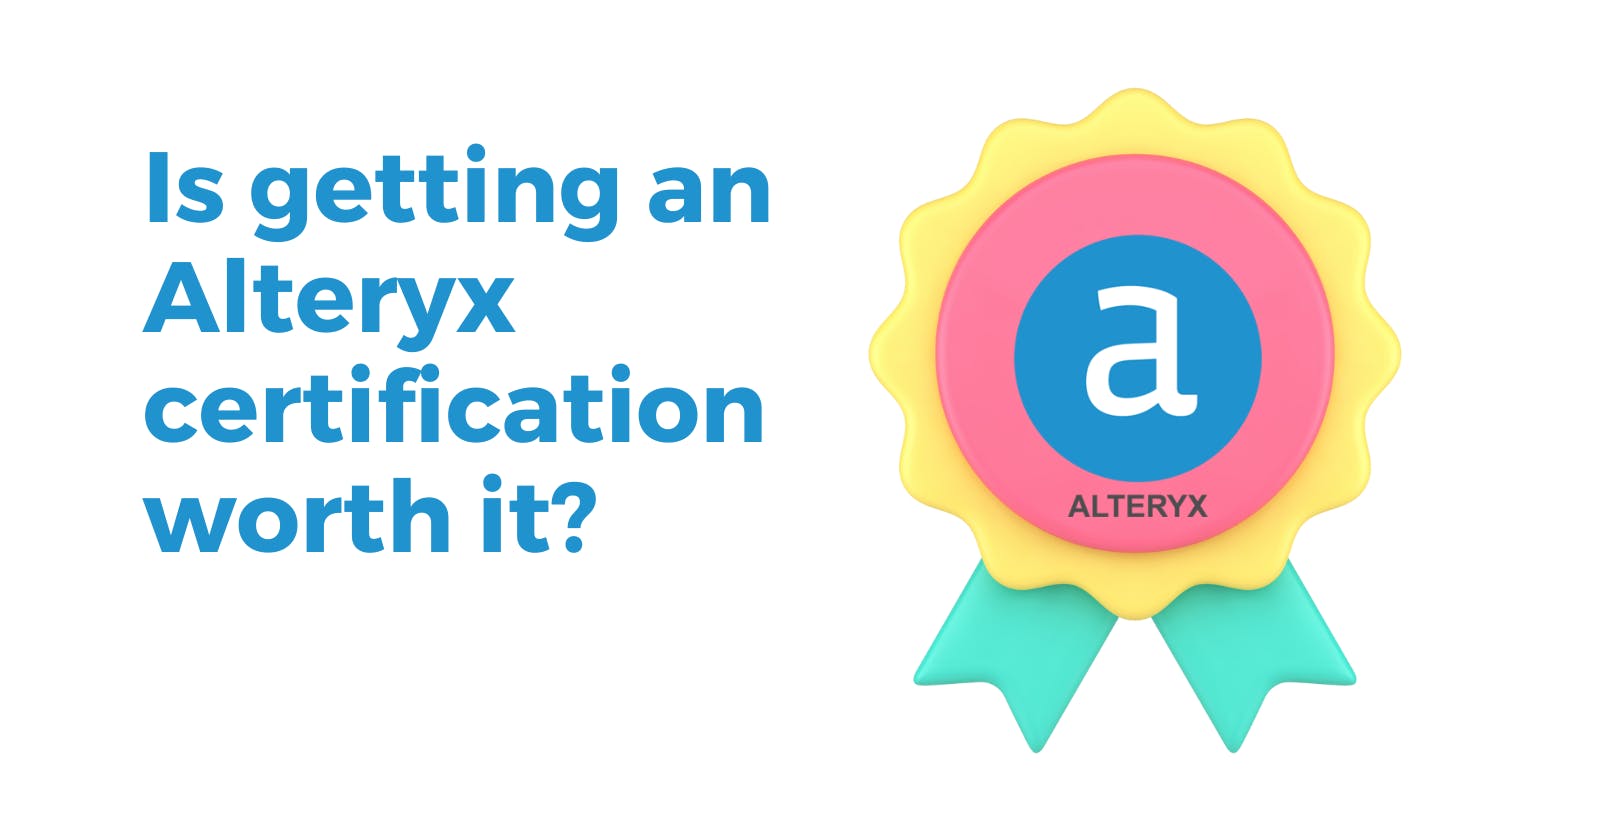 Is getting an Alteryx certification worth it?